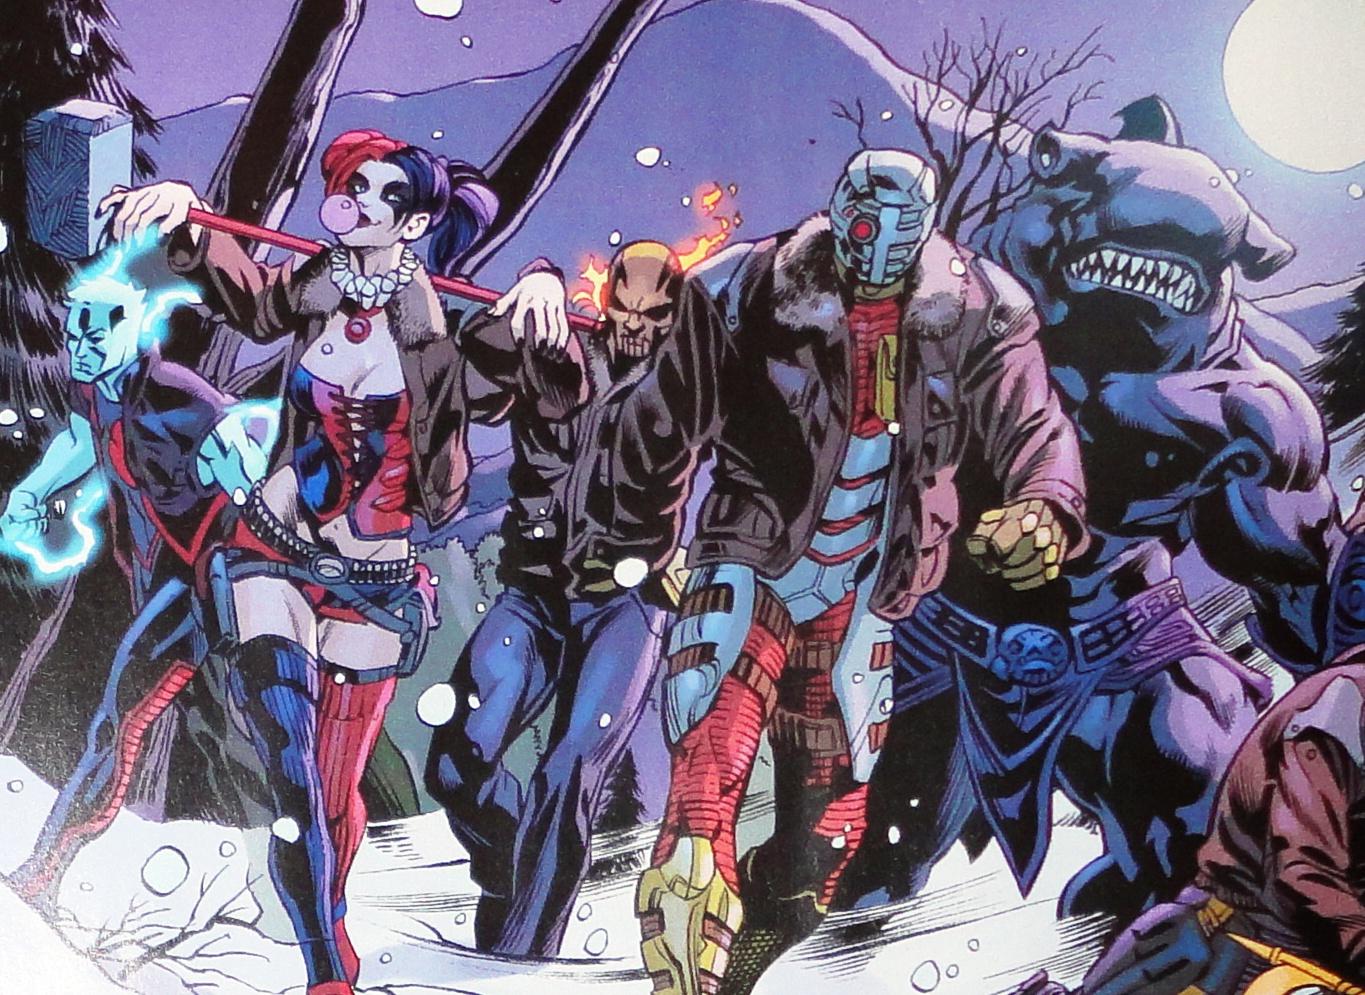 DC's 'Suicide Squad' Movie to Star Will Smith, Tom Hardy, Jared